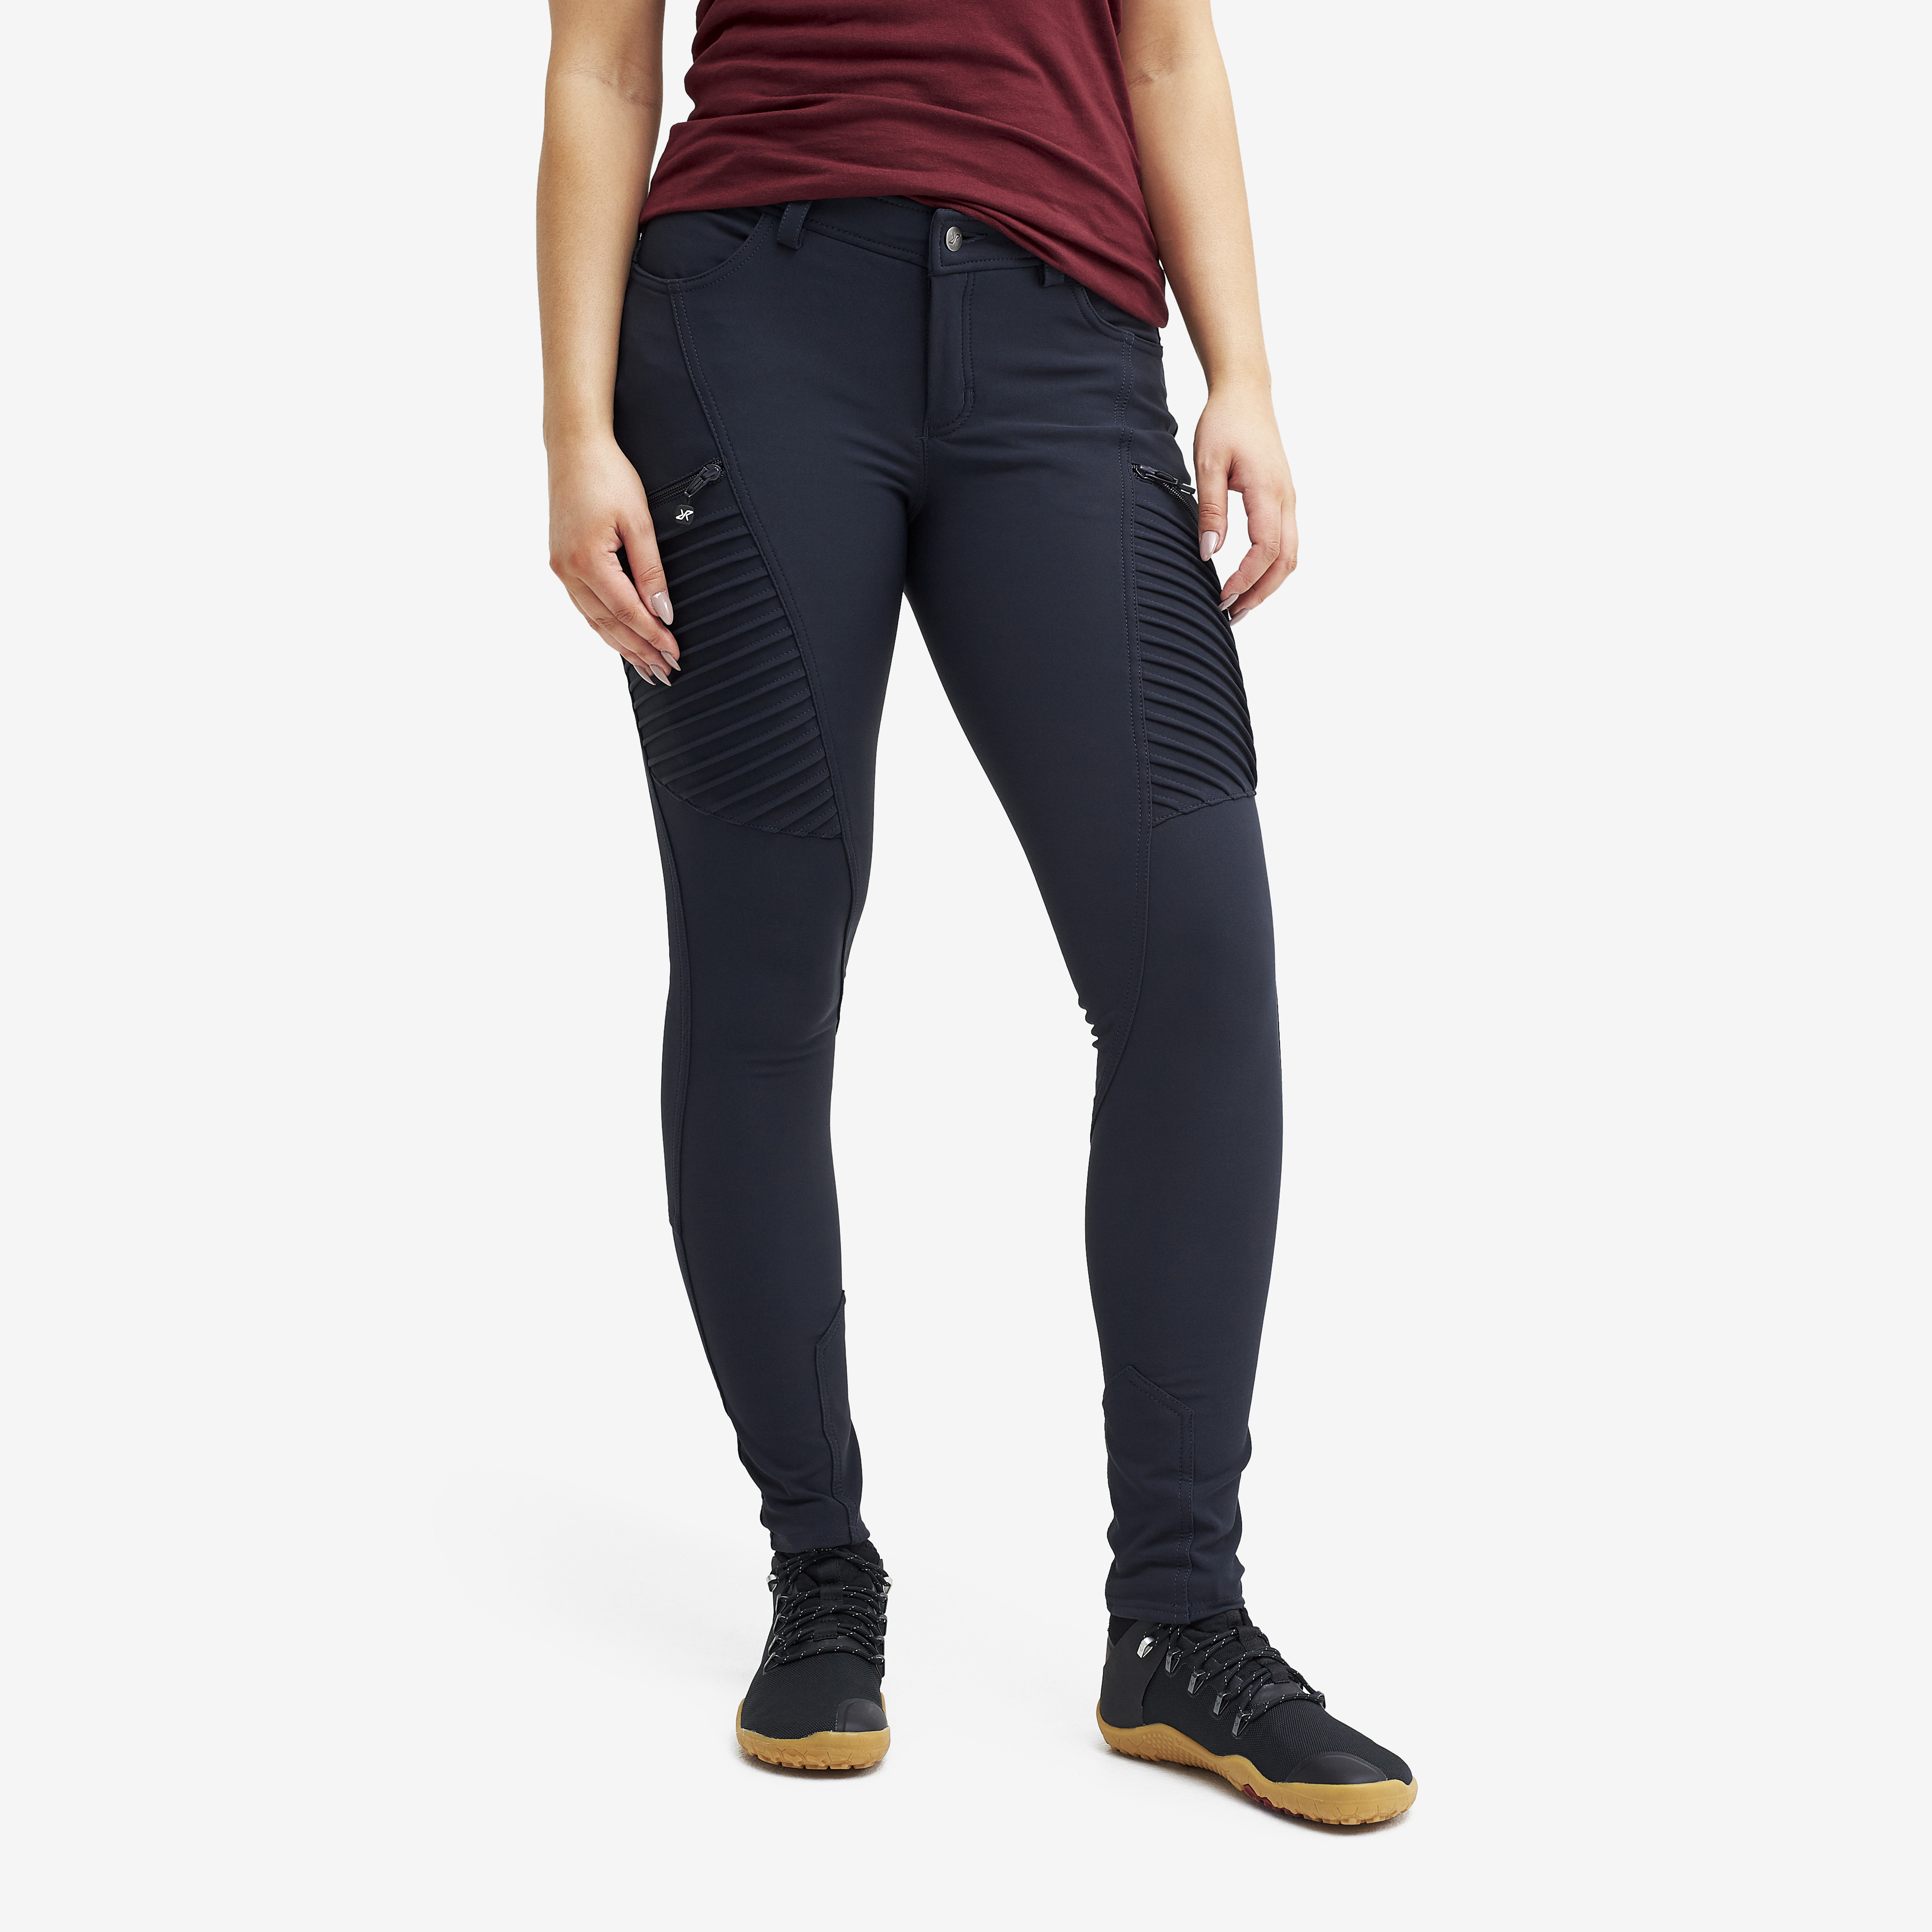 Pusher Outdoor Jeans Navy Mujeres